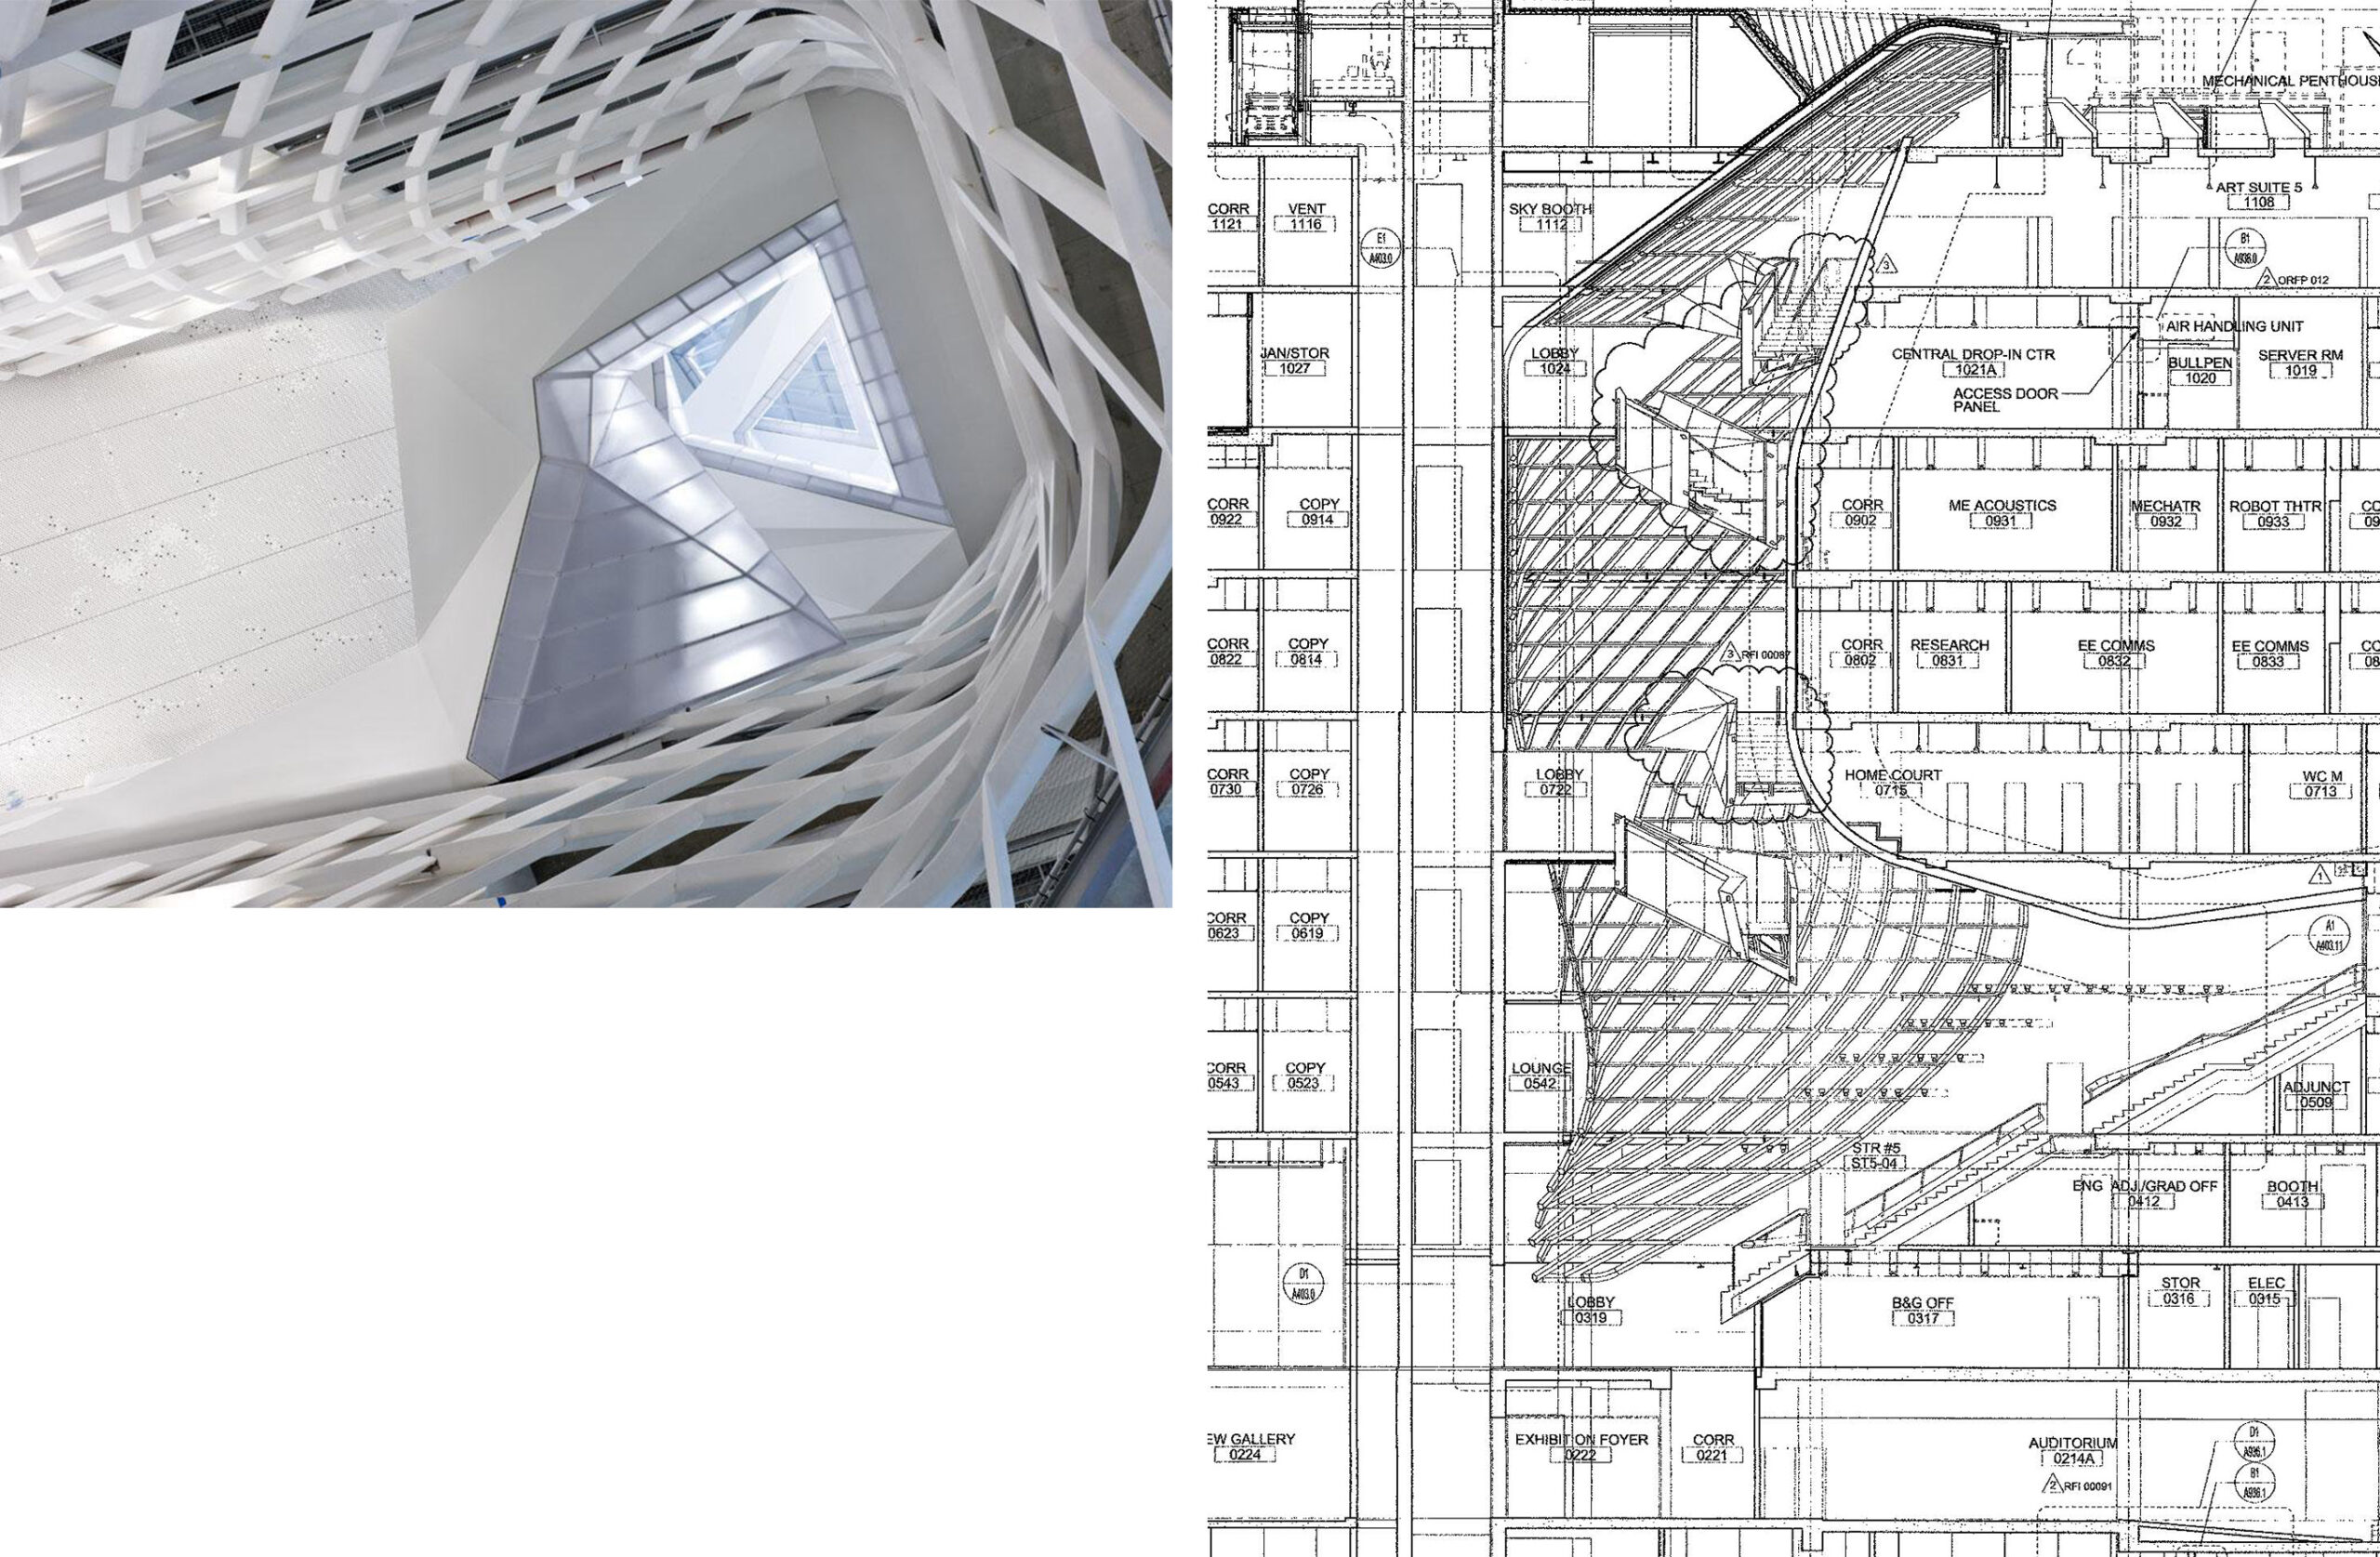 abstract image of white architectural atrium alongside the architectural section drawing of the atrium